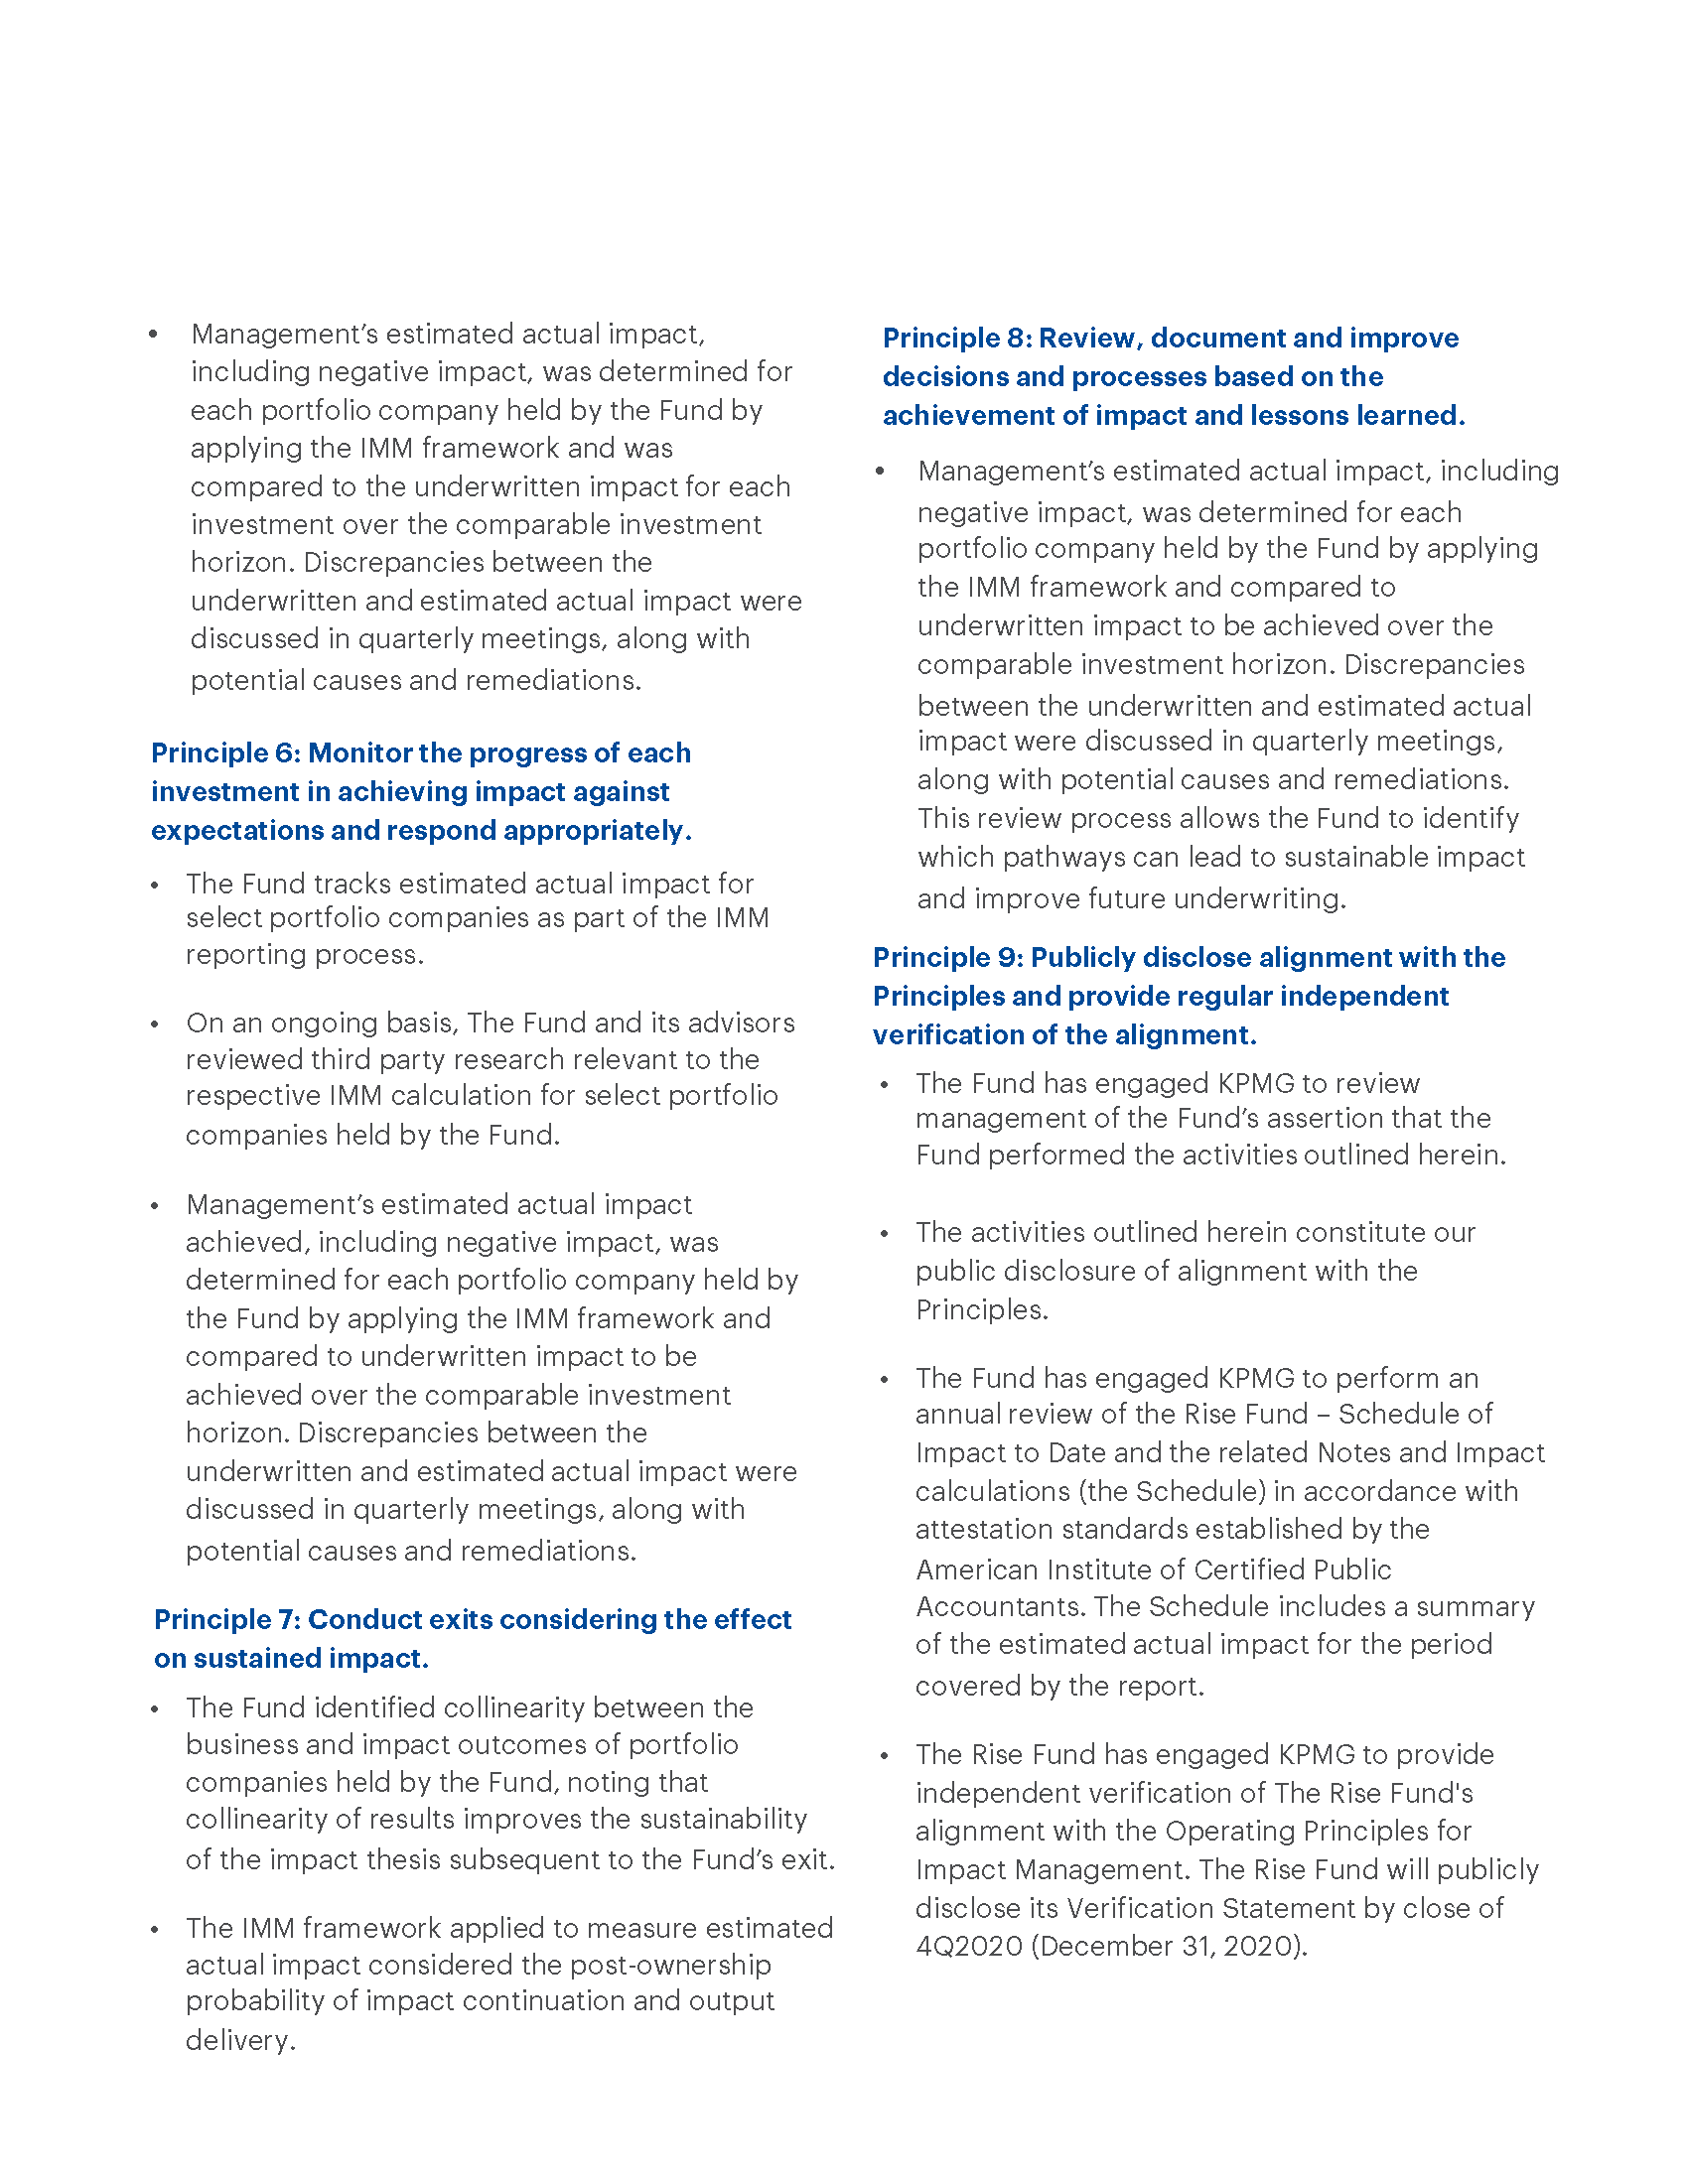 Image of text - full text of Management Assertions related to Operating Principles for Impact Management pasted below